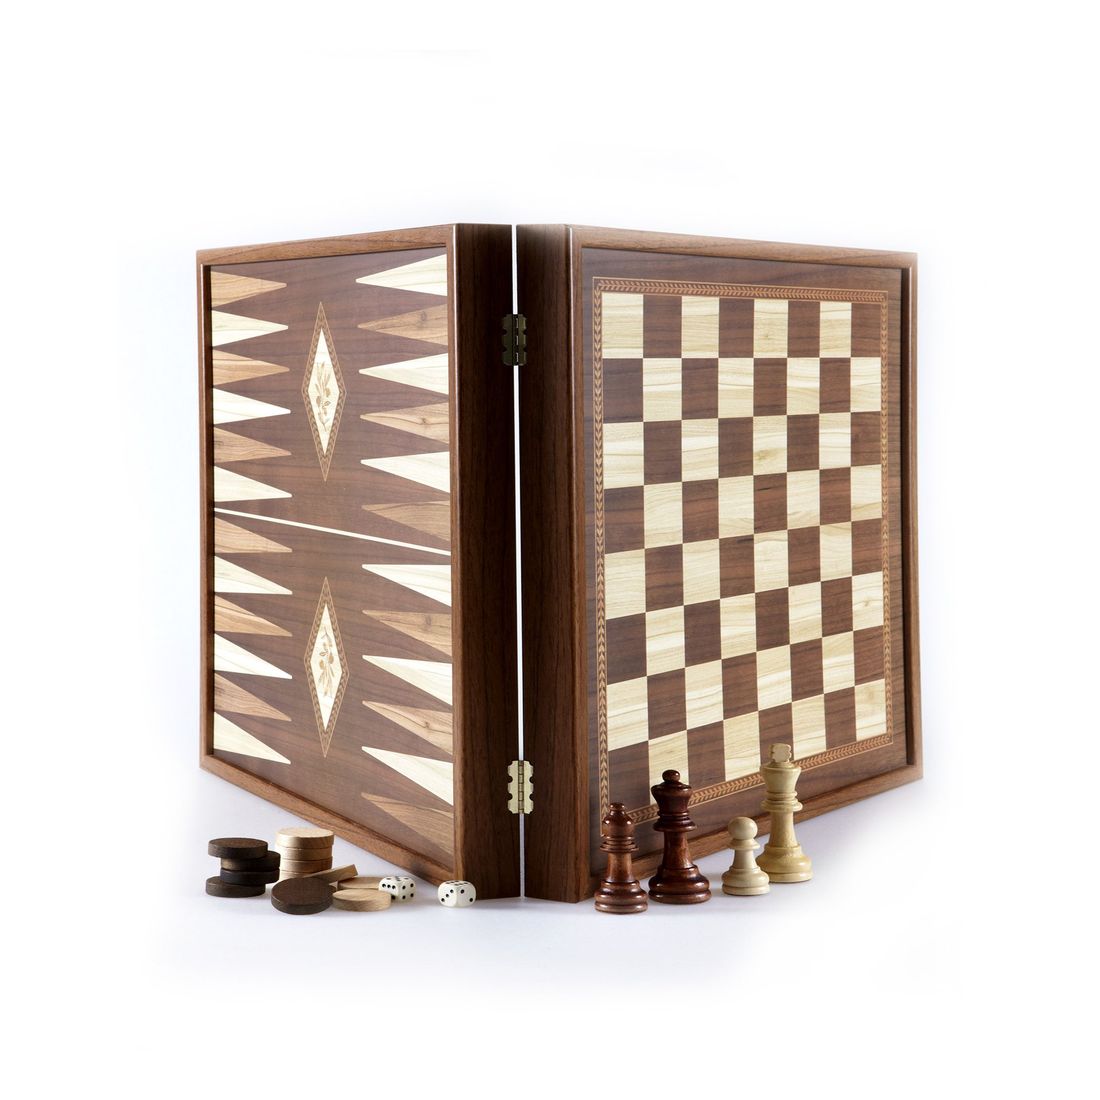 Manopoulos 2-in-1 Combo Game Classic Style - Chess/Backgammon - Small (27 x 27 cm)